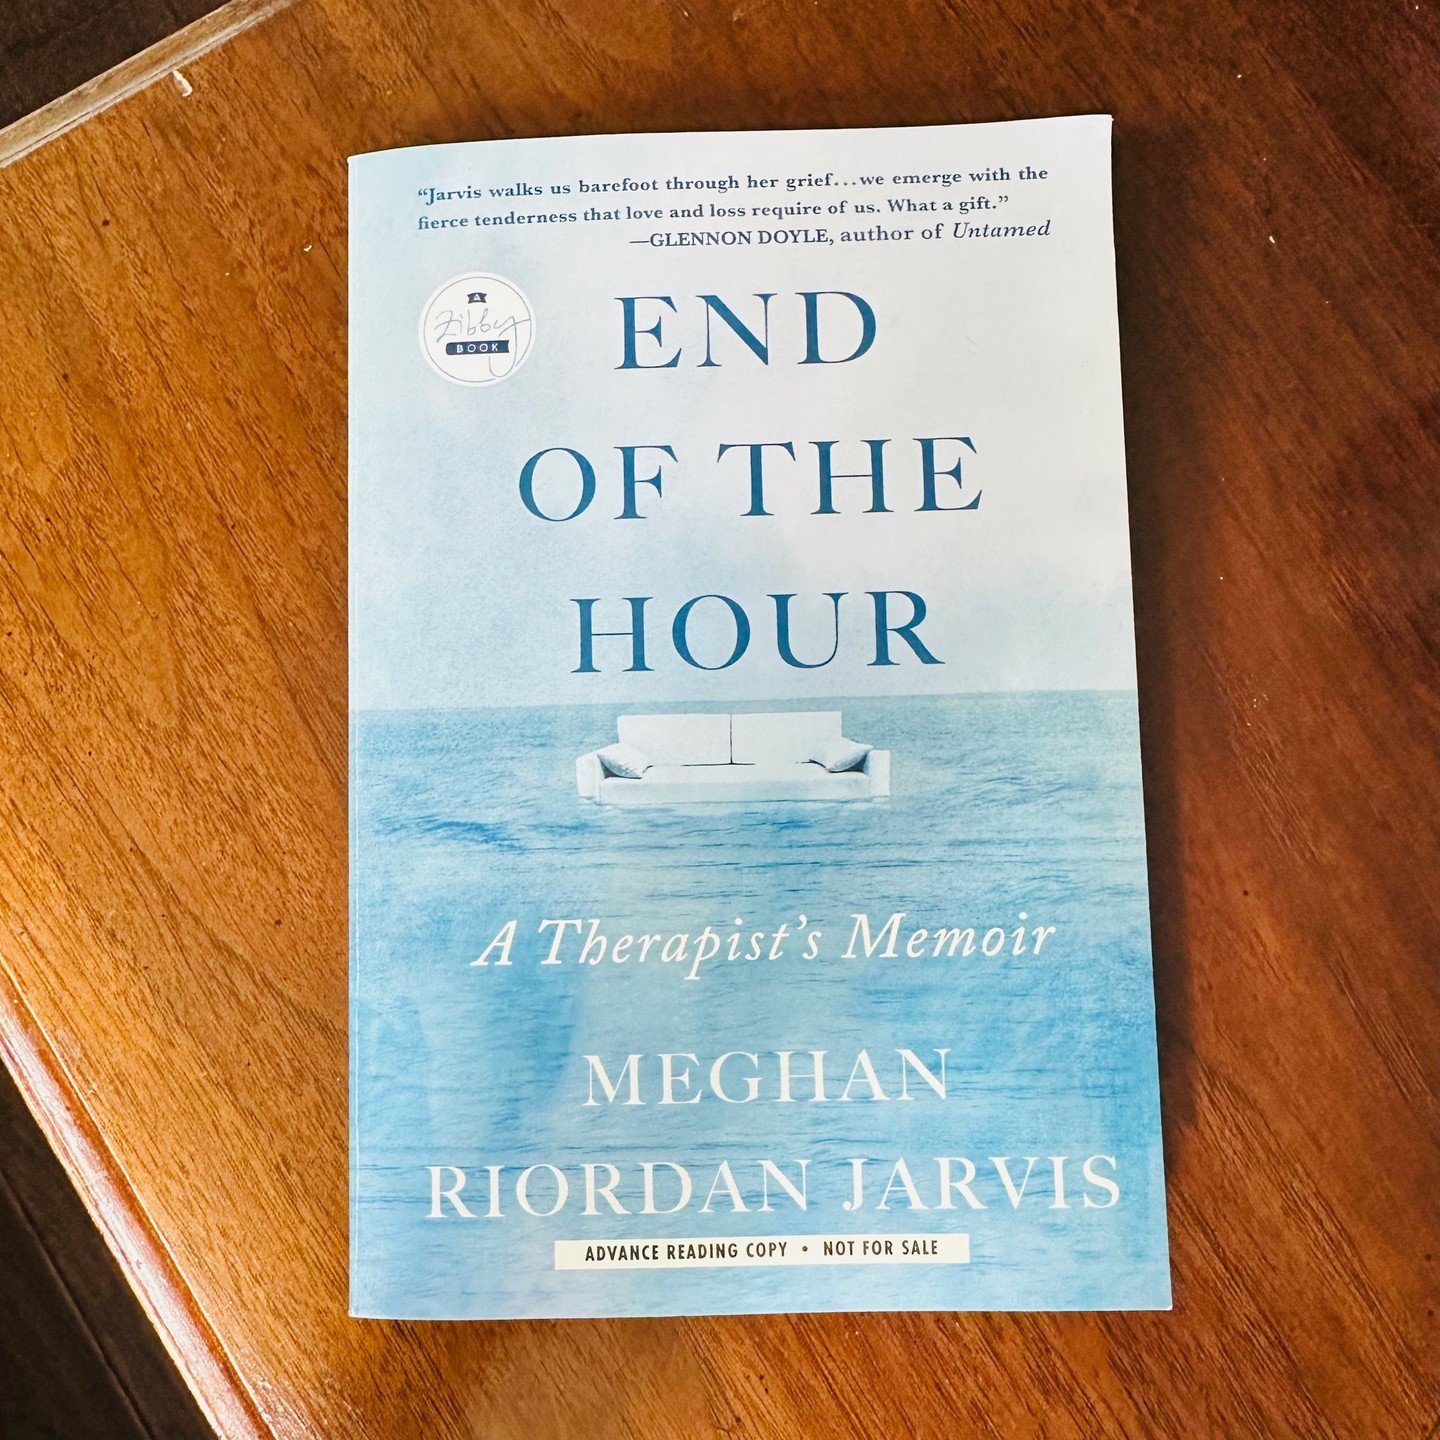 The first thing I noticed about Meghan Riordan Jarvis&rsquo; book is that it is beautiful, both the cover and the marketing of the advance reader copy that I received in the mail. Nestled within the crinkly navy packing paper was this lovely text, a 